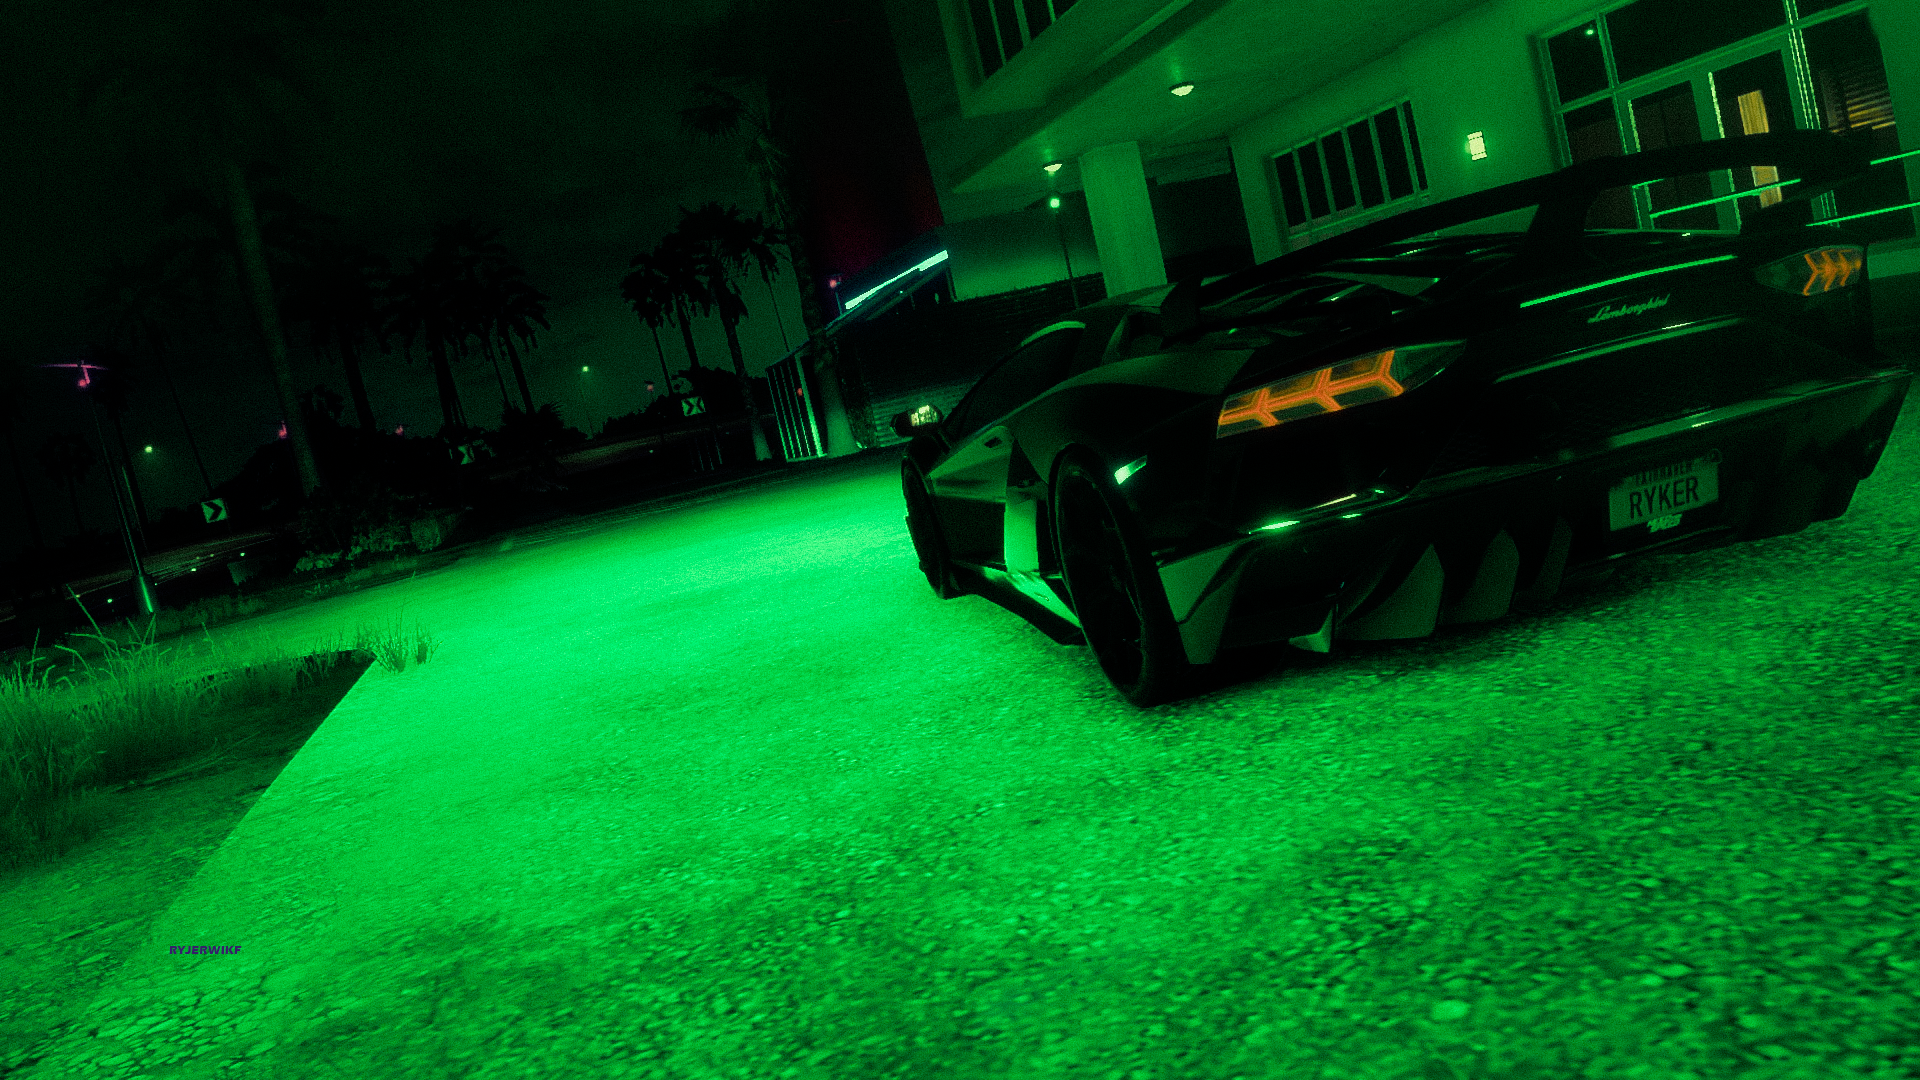 Need For Speed Need For Speed Heat Car Lamborghini Vehicle Video Games Green Background Taillights C 1920x1080